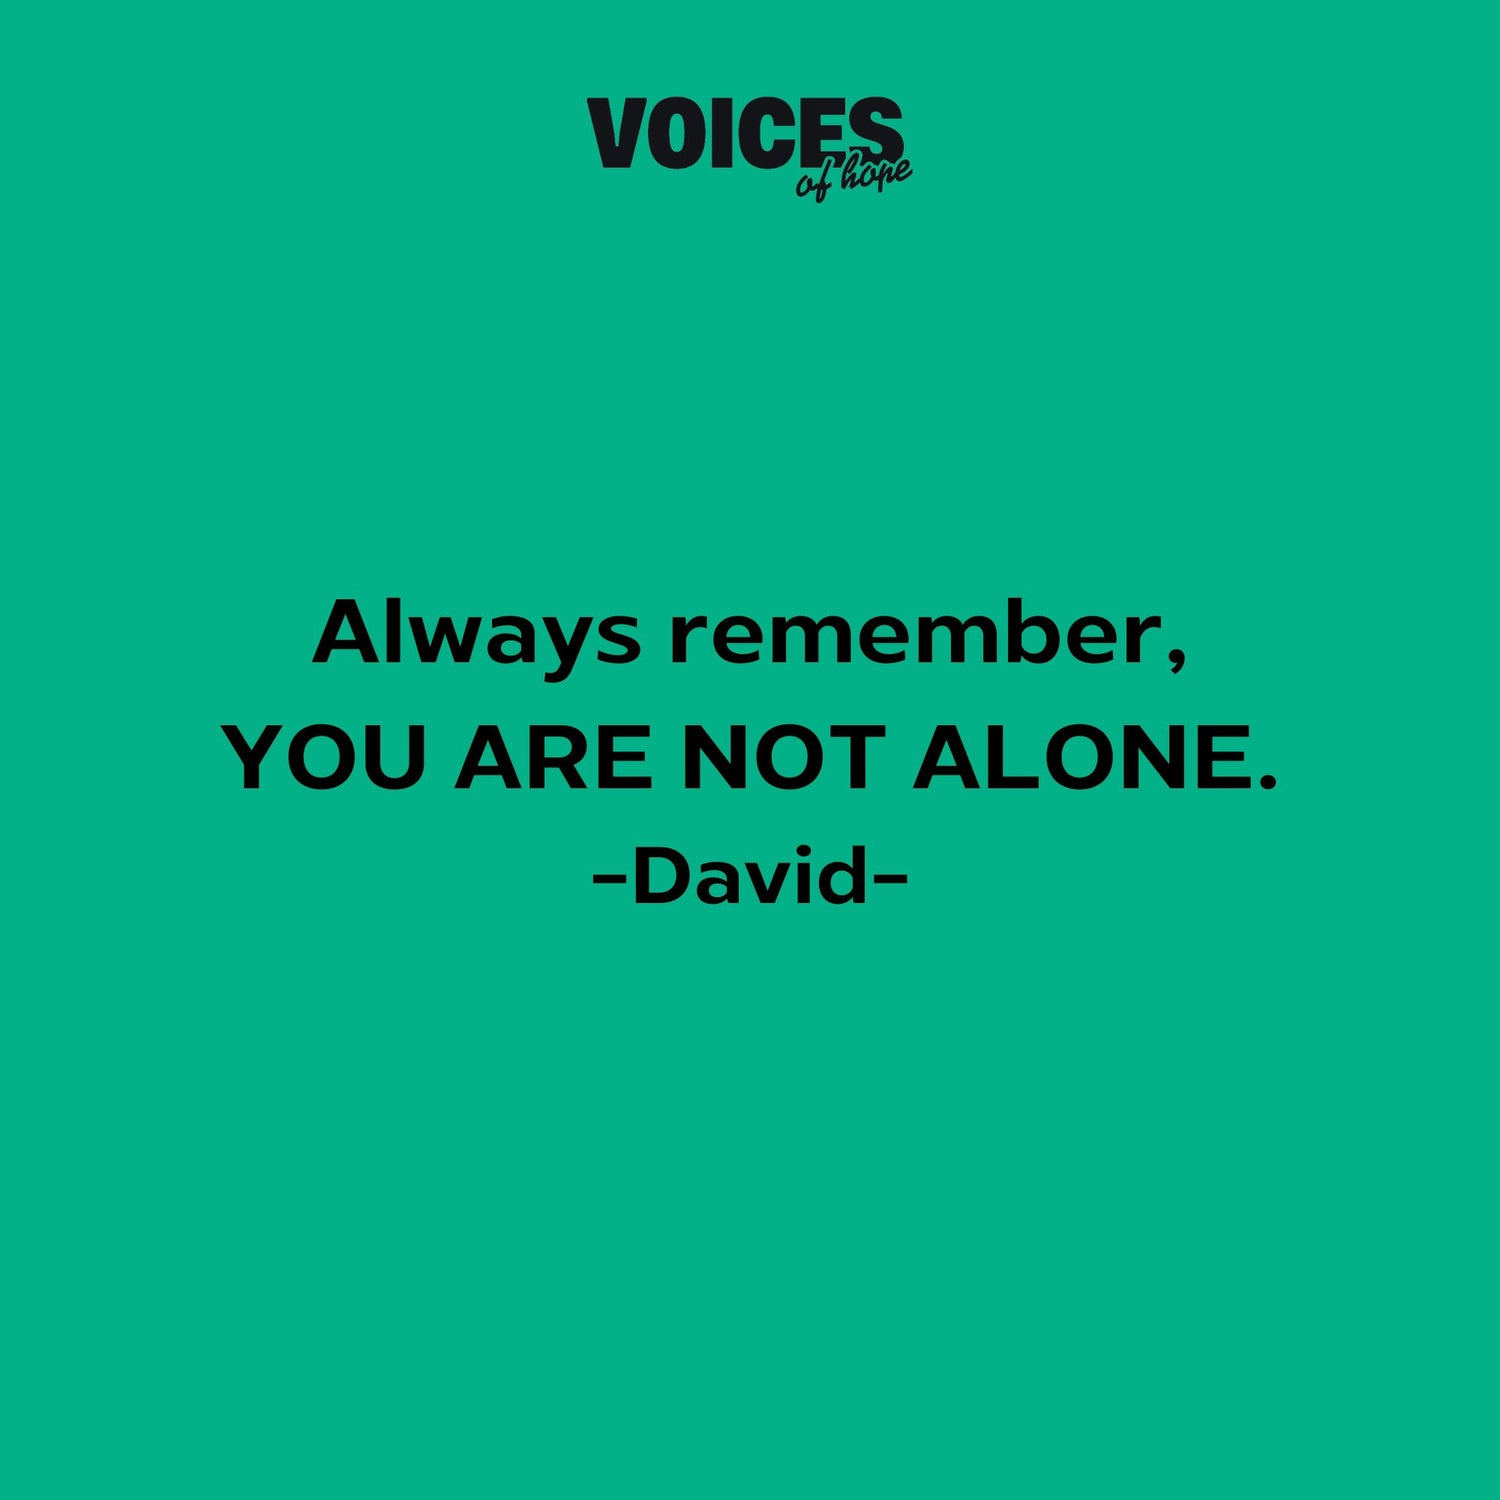 Green background with black writing that reads: "always remember, YOU ARE NOT ALONE. David."